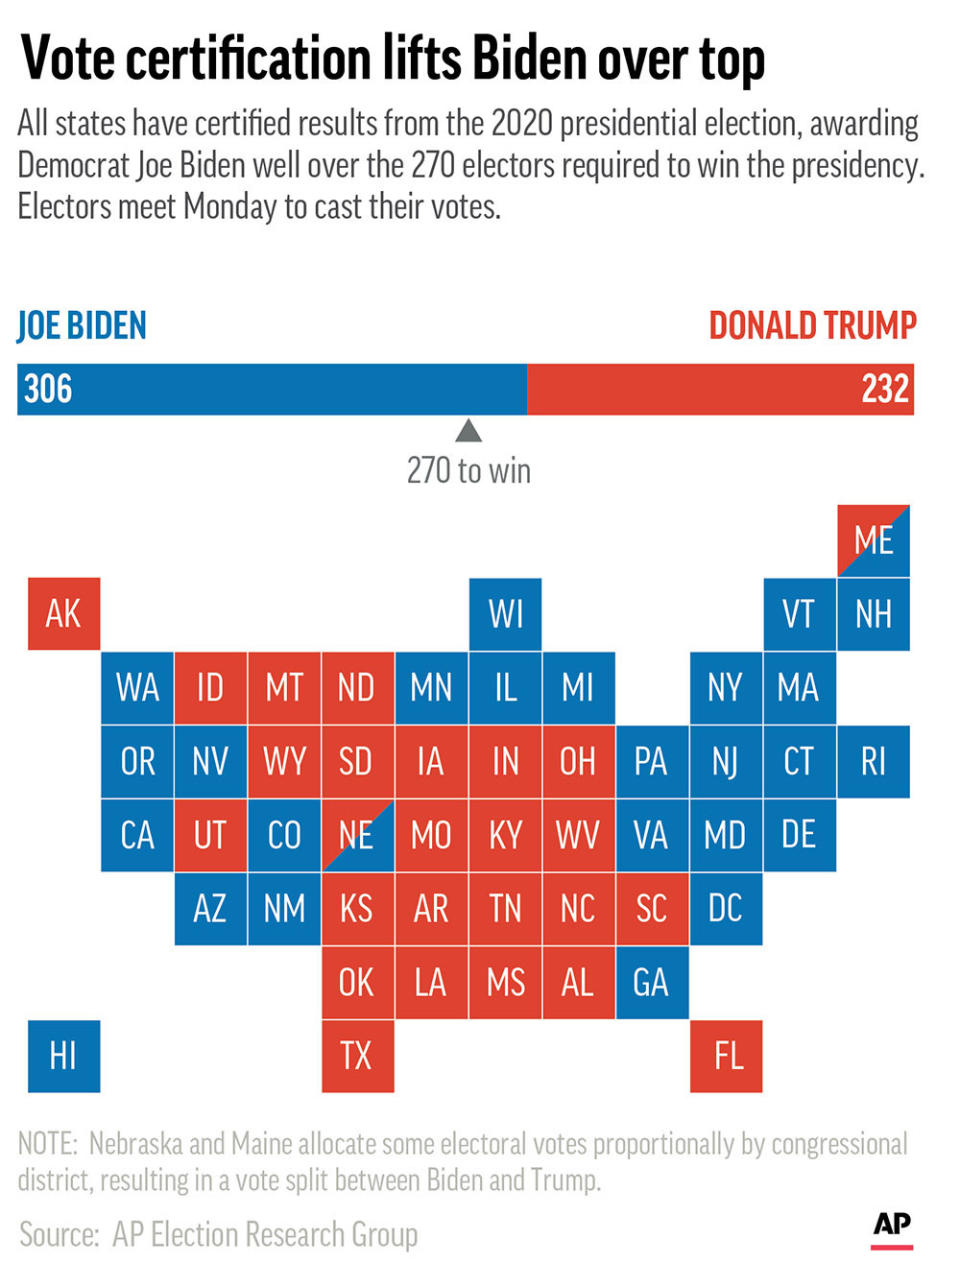 All states have certified results of the 2020 presidential election ahead of a Dec. 14 meeting of electors. (AP Graphic)